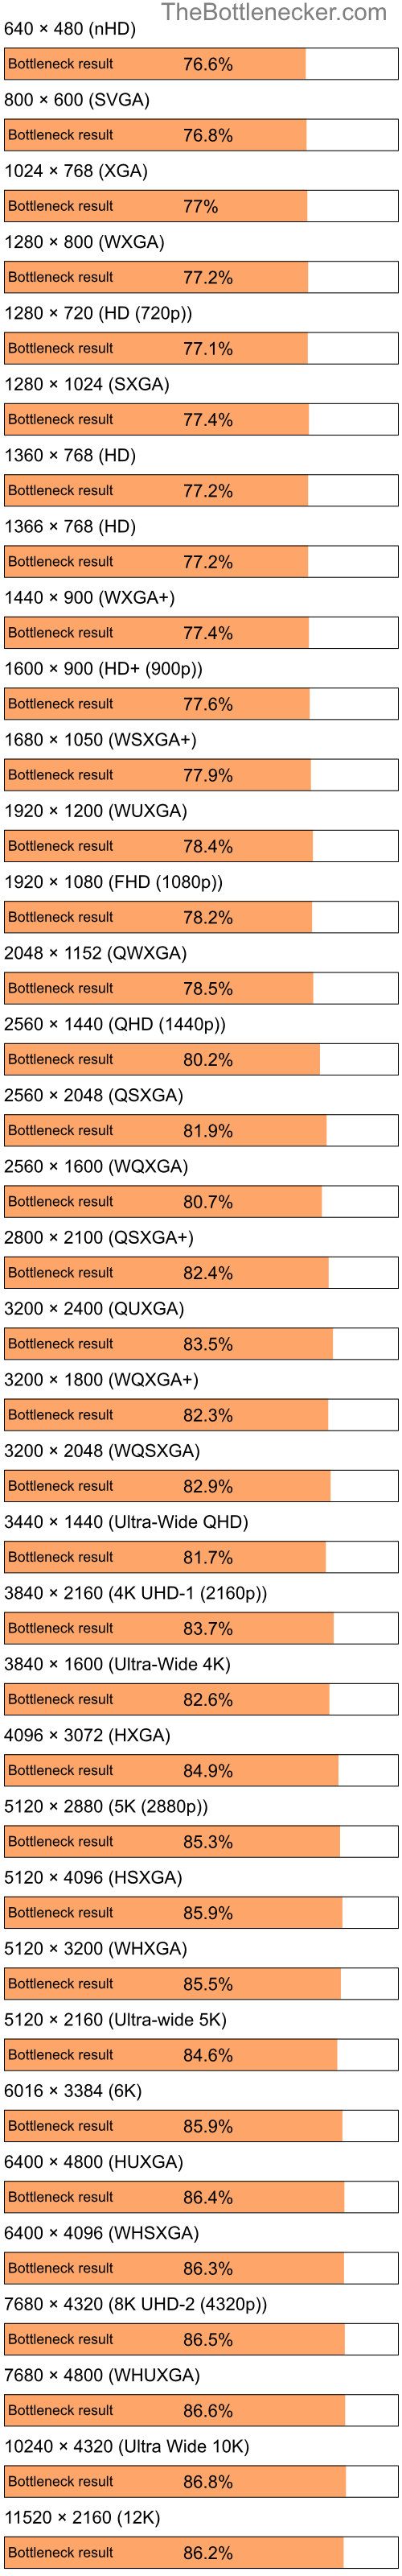 Bottleneck results by resolution for Intel Atom Z520 and AMD Mobility Radeon 9600 in7 Days to Die